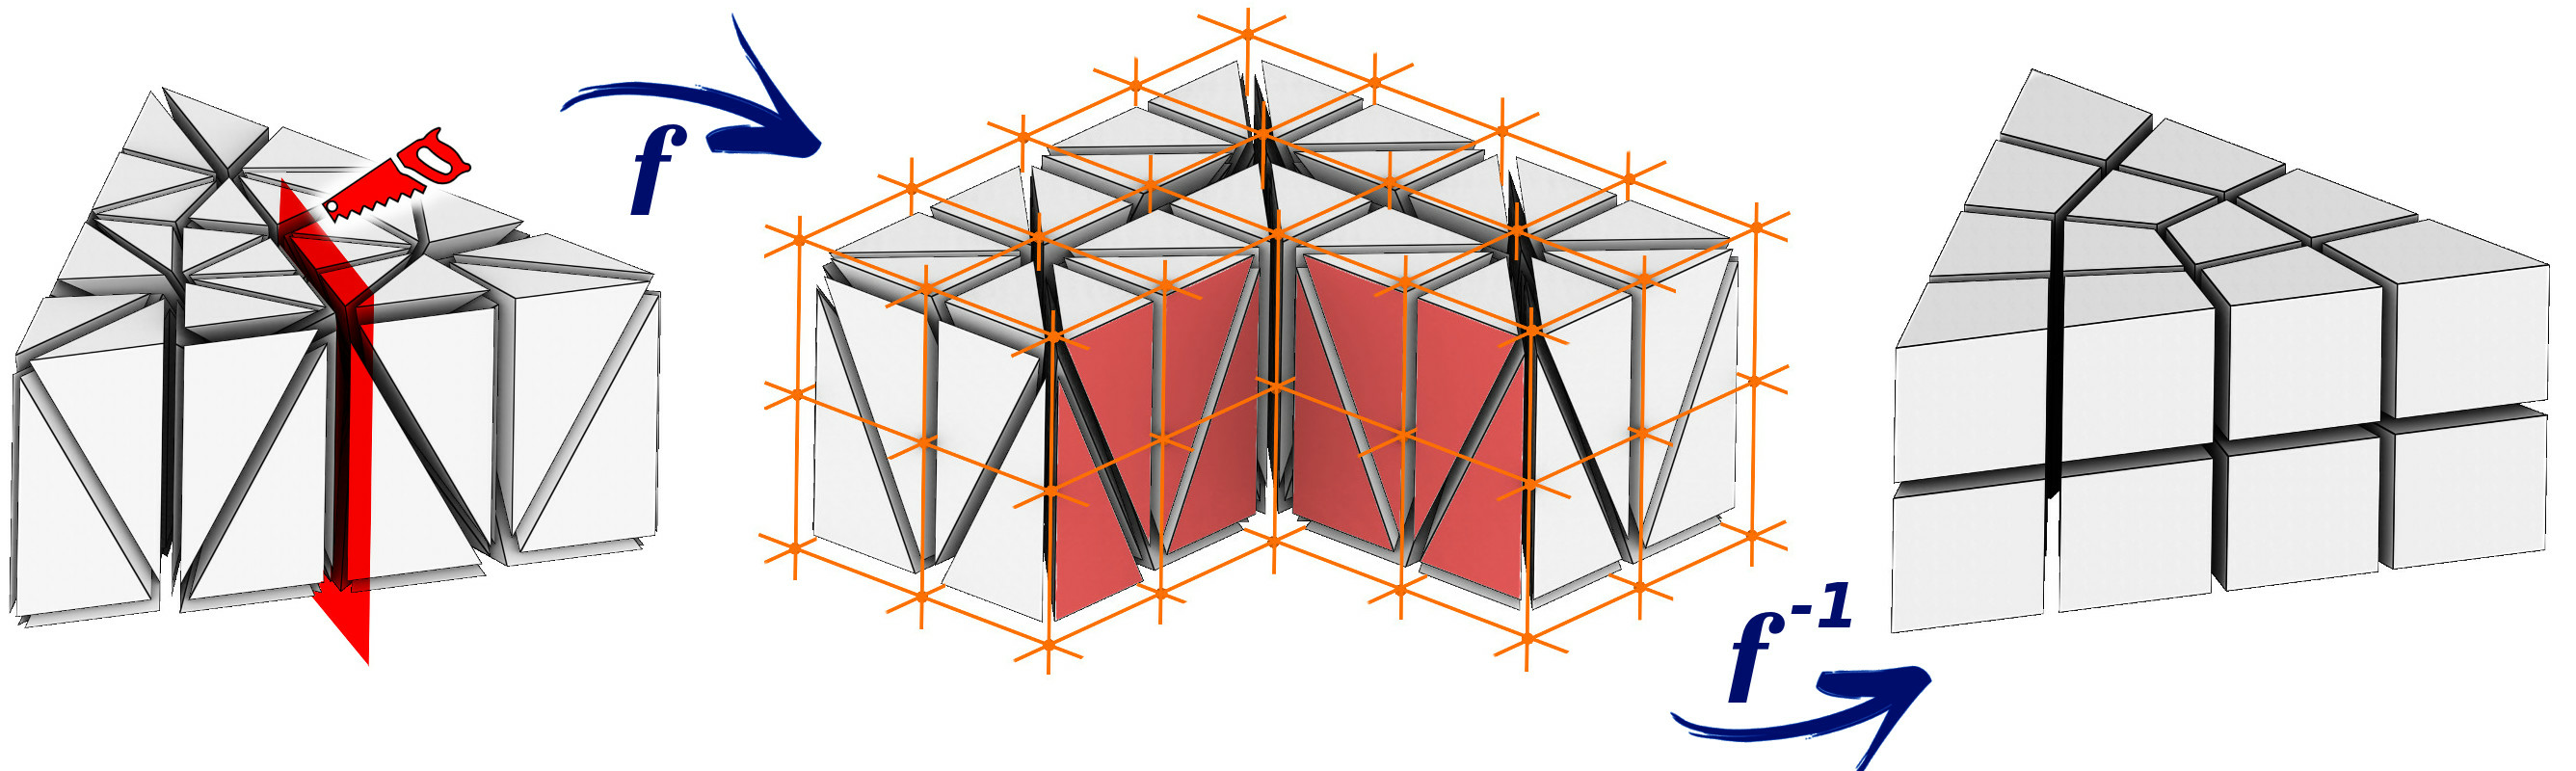 Hex-remeshing via global parameterization. Left: Input tetrahedral mesh.
To allow for a singular edge in the center, the mesh is cut open along the red plane.
Middle: Mesh in parametric space. Right: Output mesh defined by parameterization.